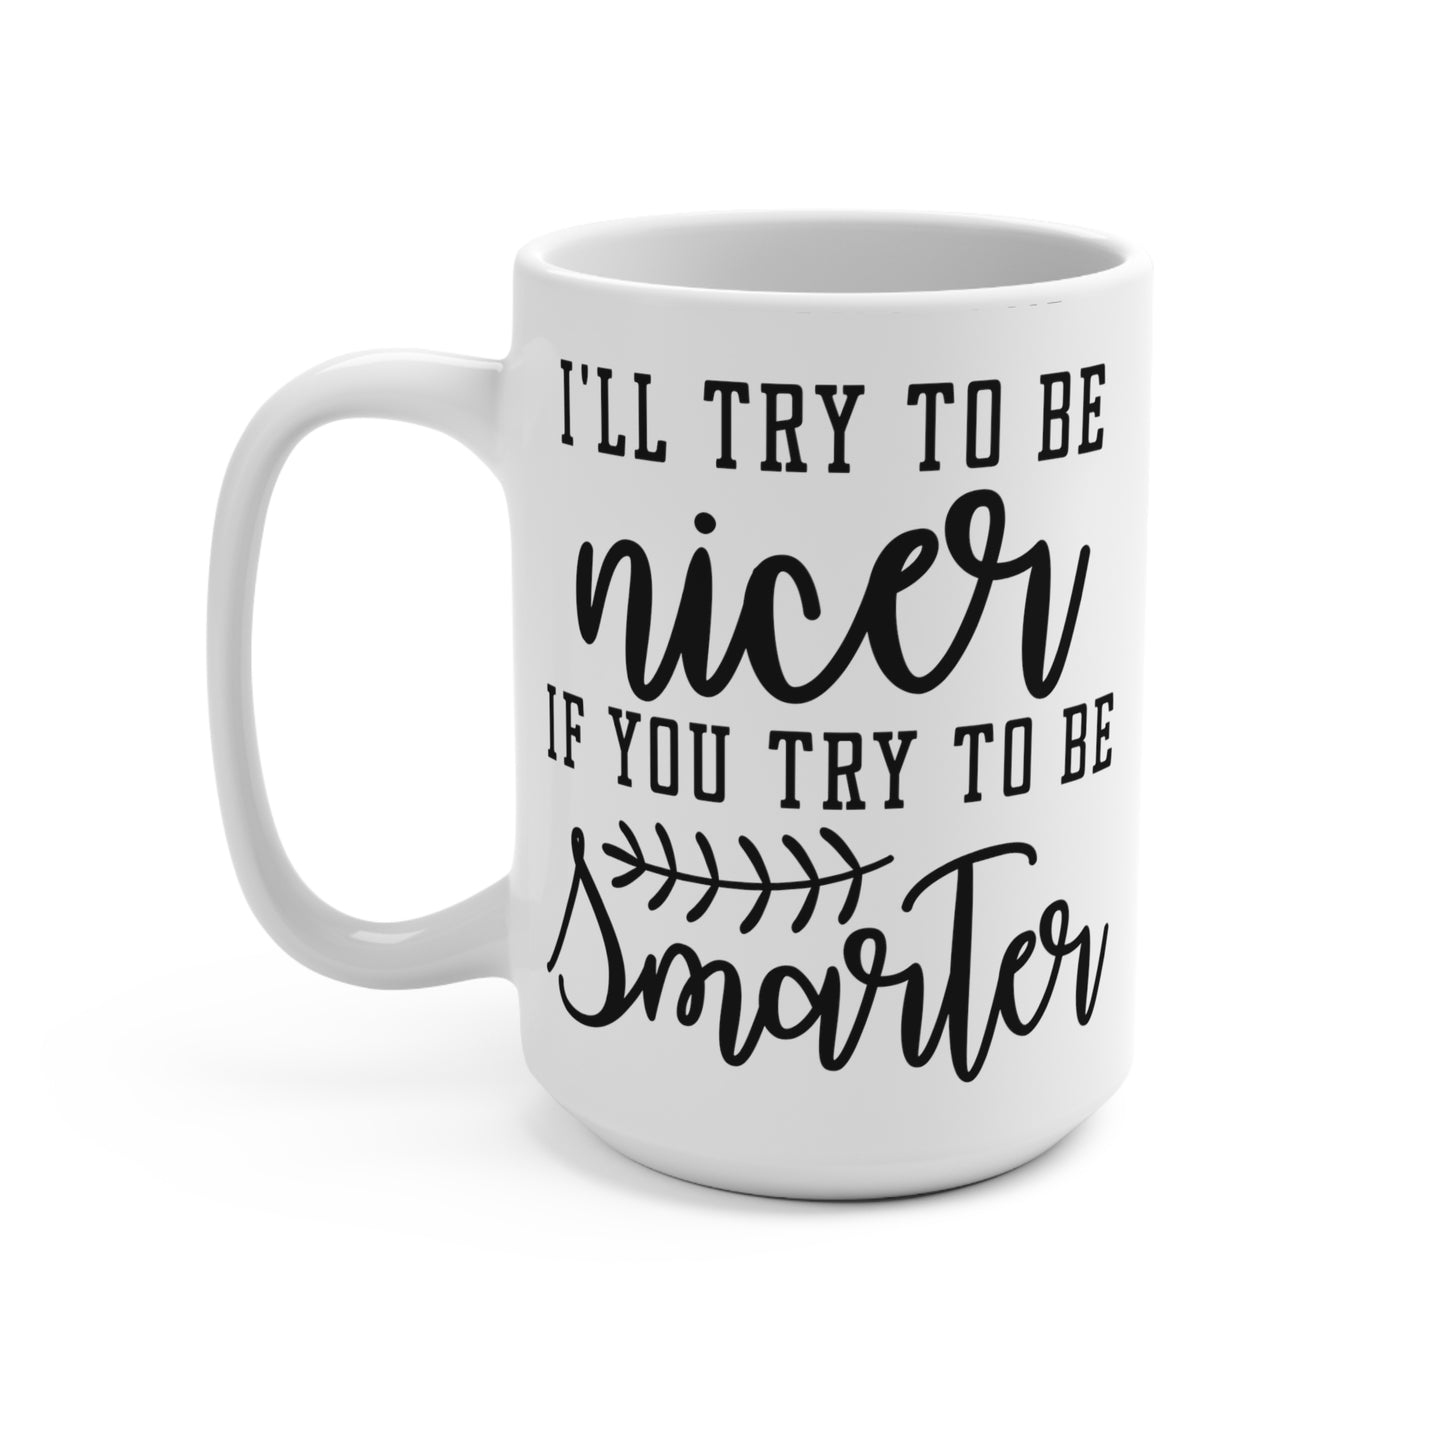 Funny Quote Coffee Mug, I'll Try To Be Nicer If You Try To Be Smarter, Sarcastic Work Mug, Gift for Coworker, Office Humor